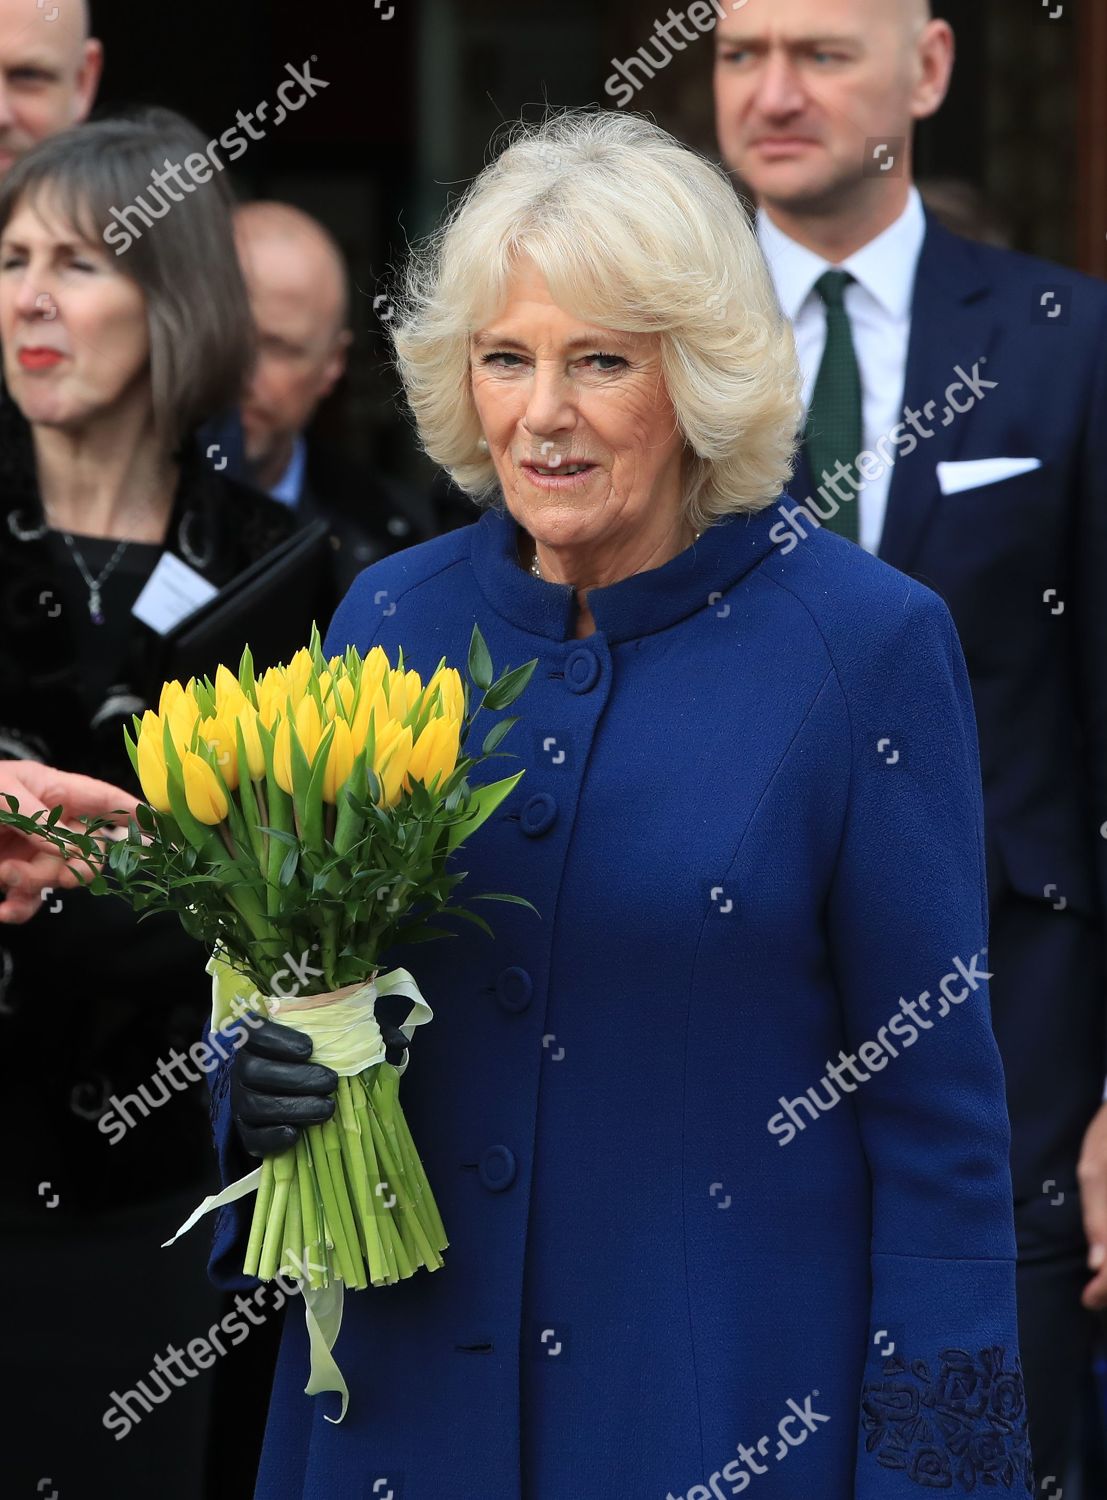 prince-charles-and-duchess-of-cornwall-visit-liverpool-uk-shutterstock-editorial-10102607q.jpg